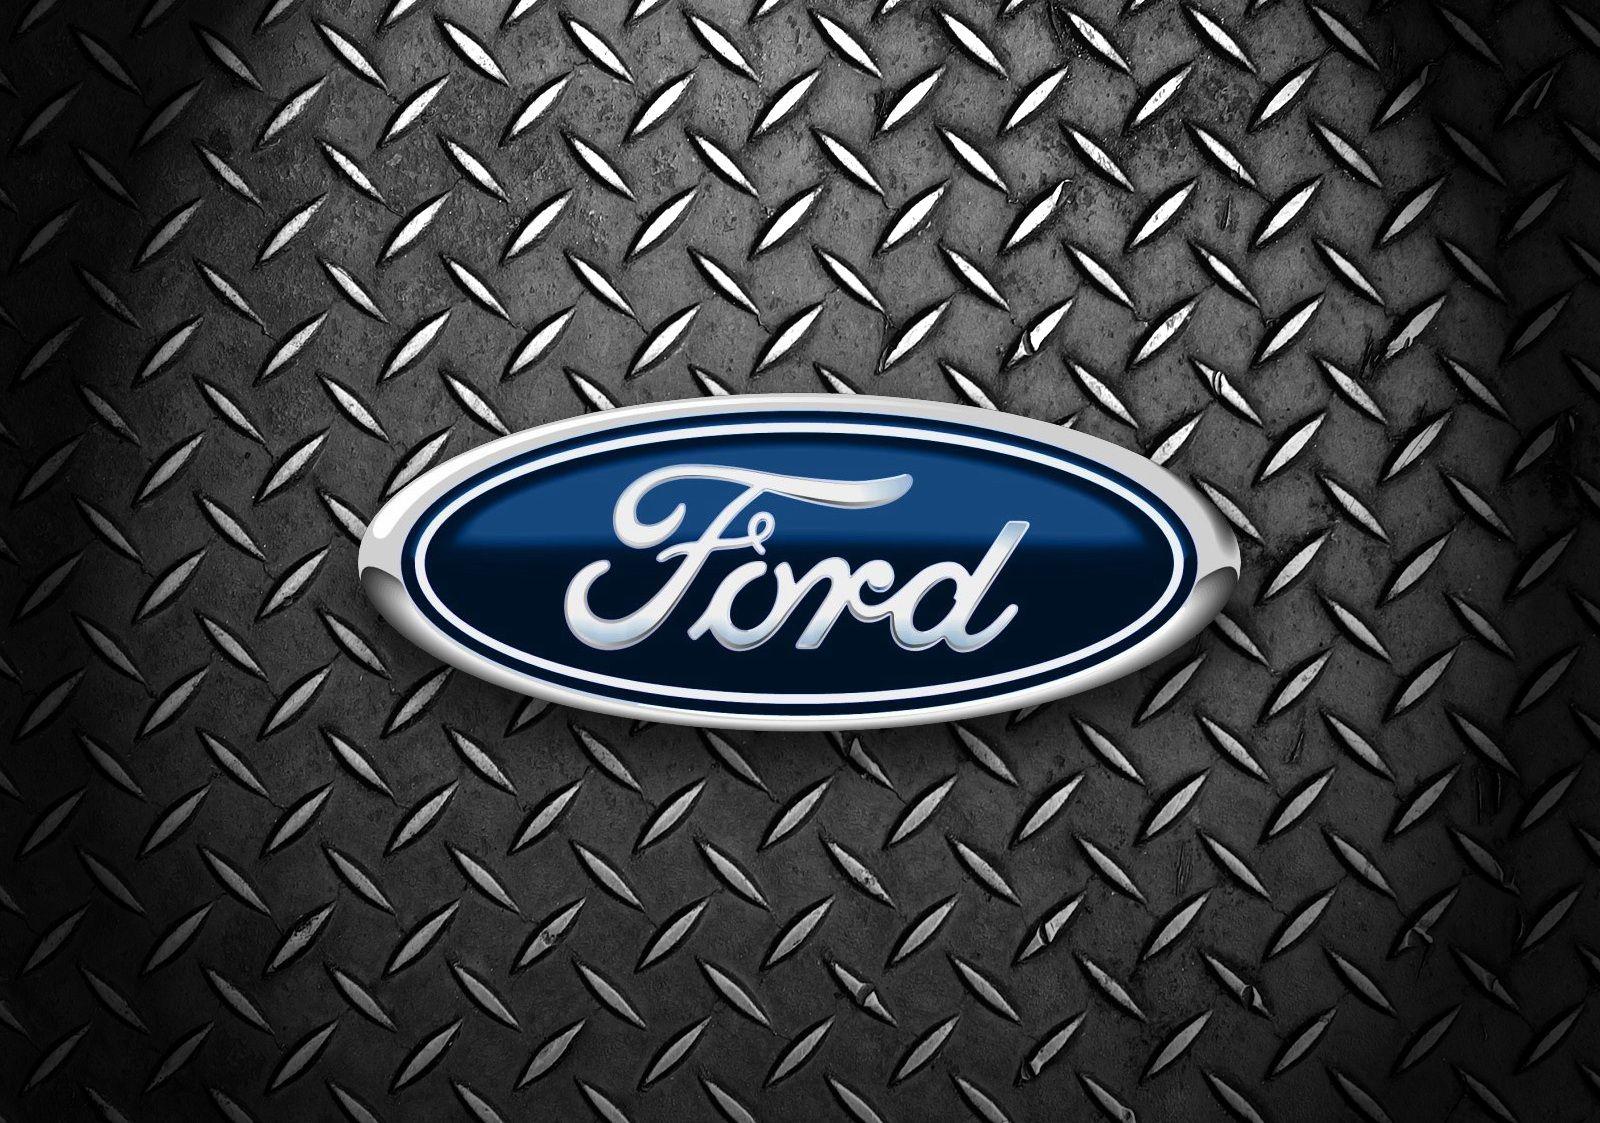 White and Dark Blue Company Logo - Ford Logo, Ford Car Symbol Meaning and History | Car Brand Names.com